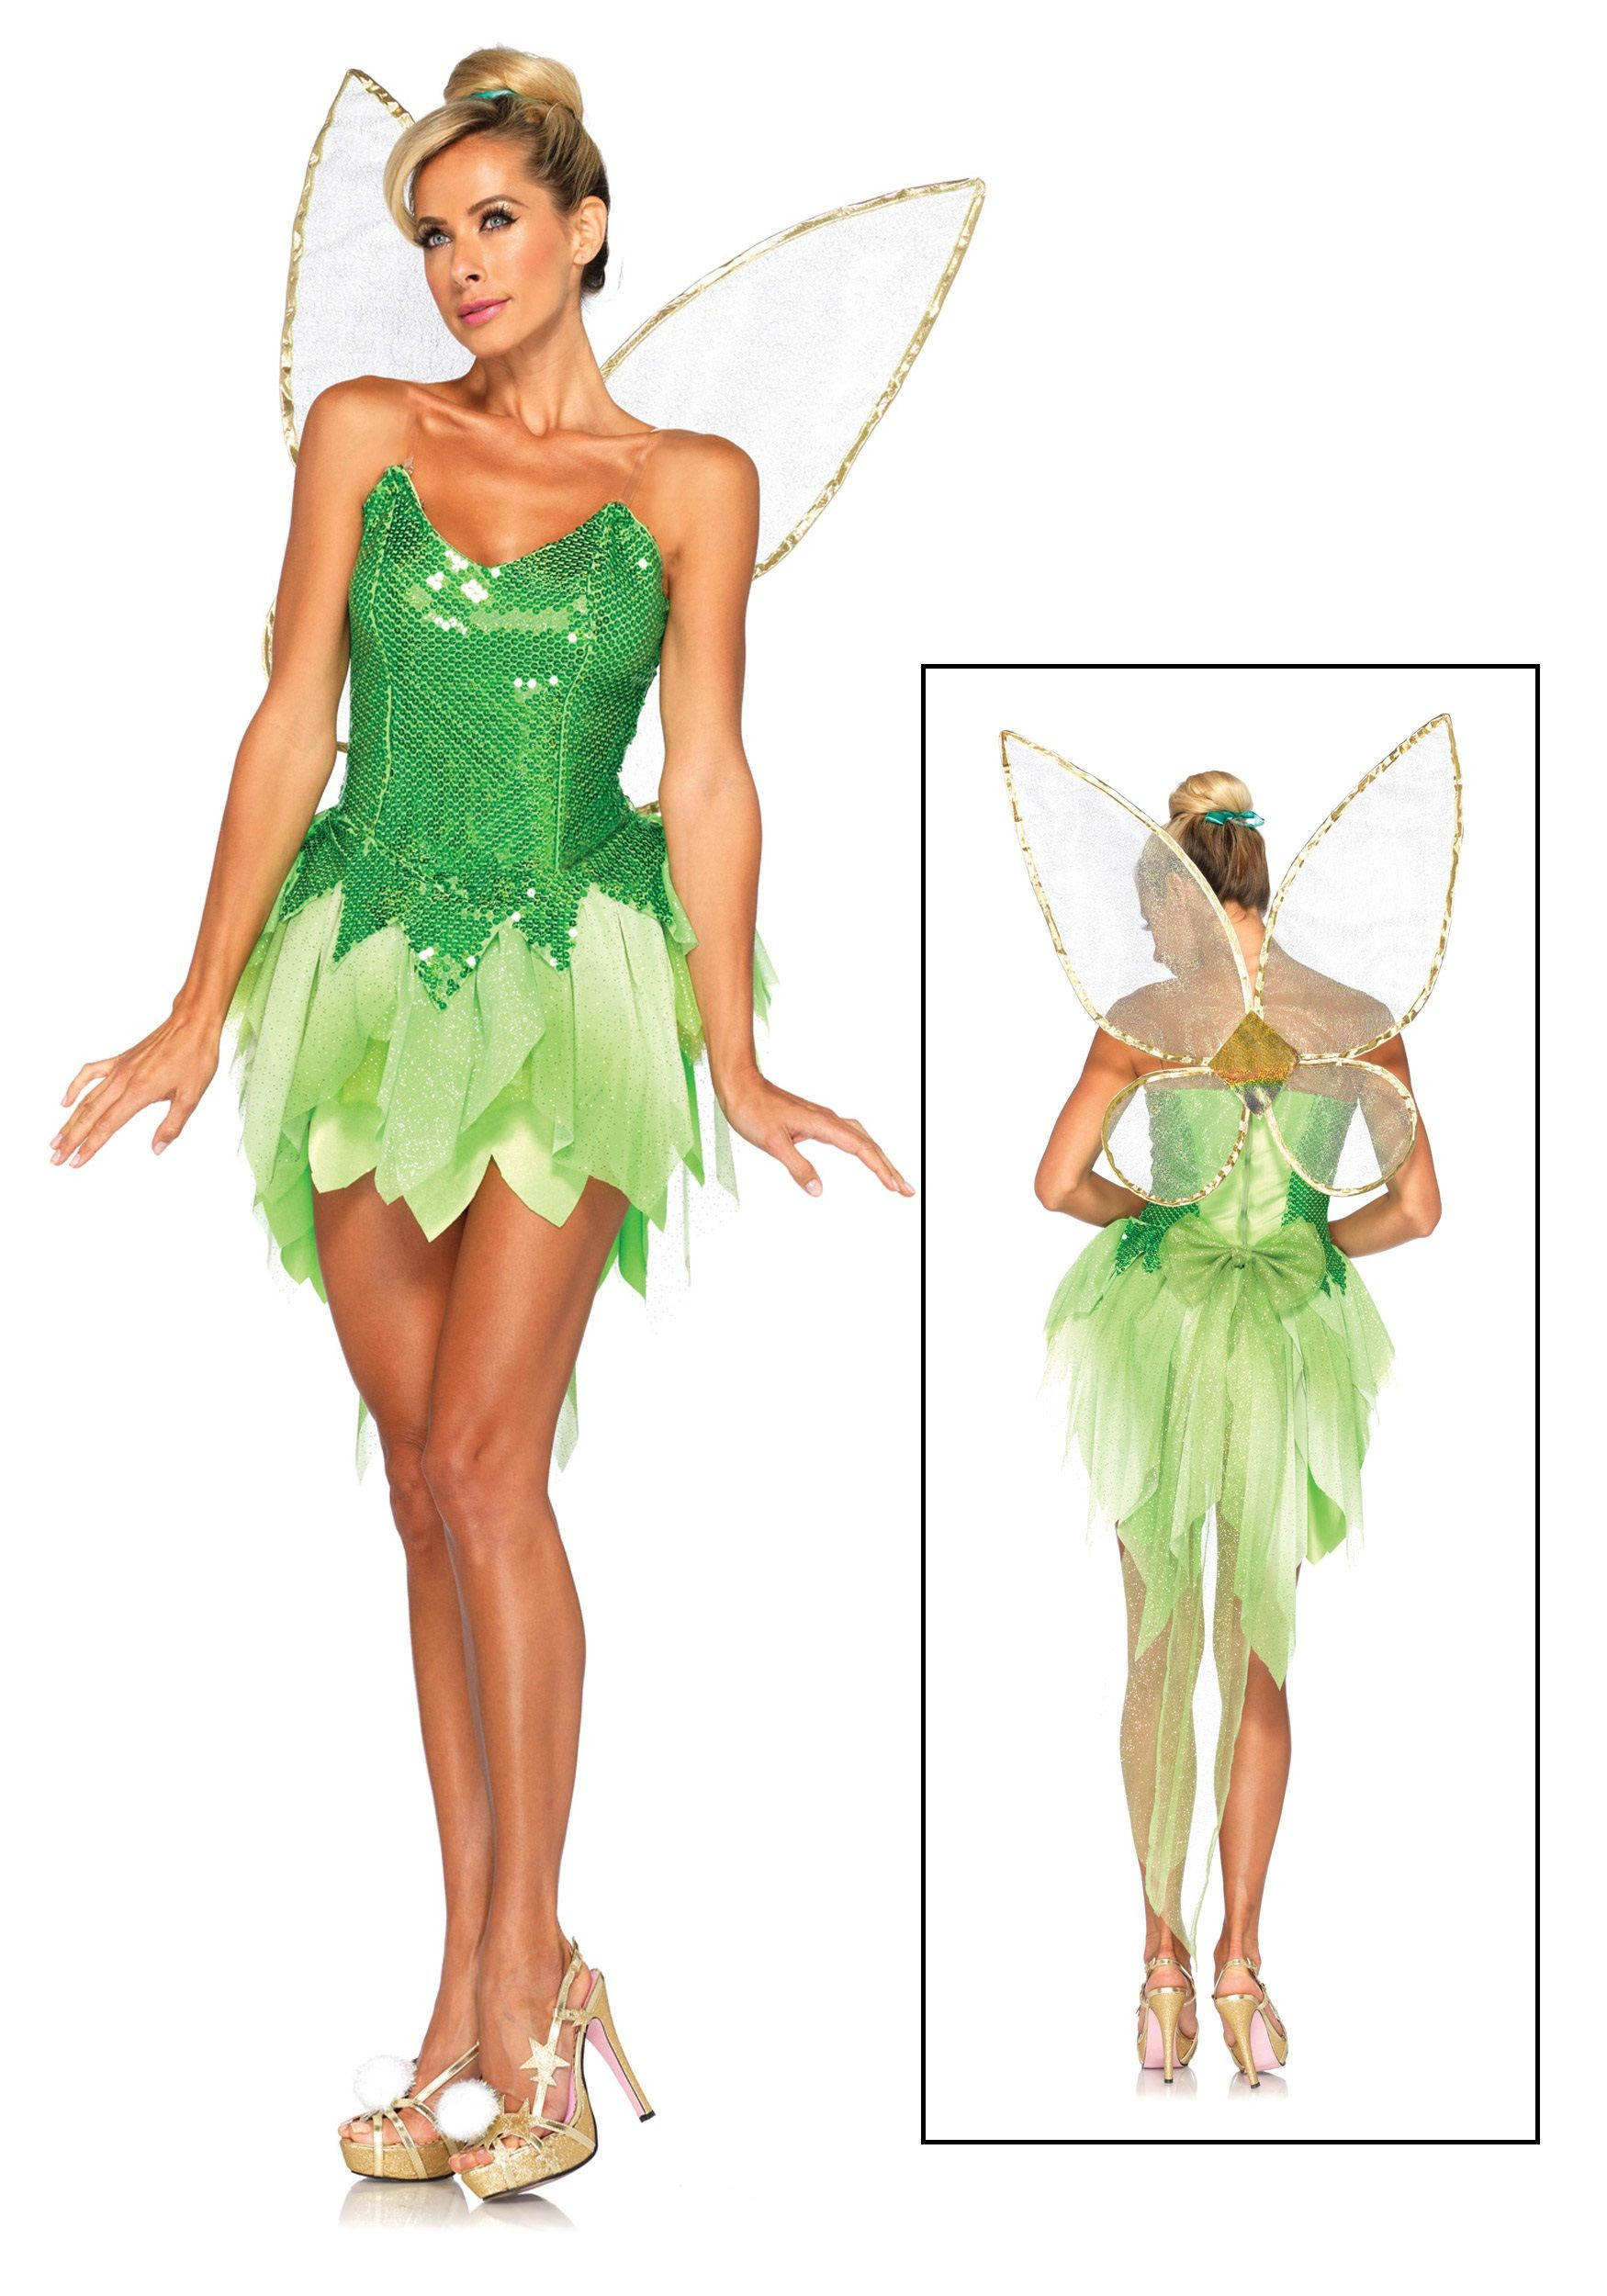 DIY Tinkerbell Costume For Adults
 Womens Disney Pixie Dust Tink Costume